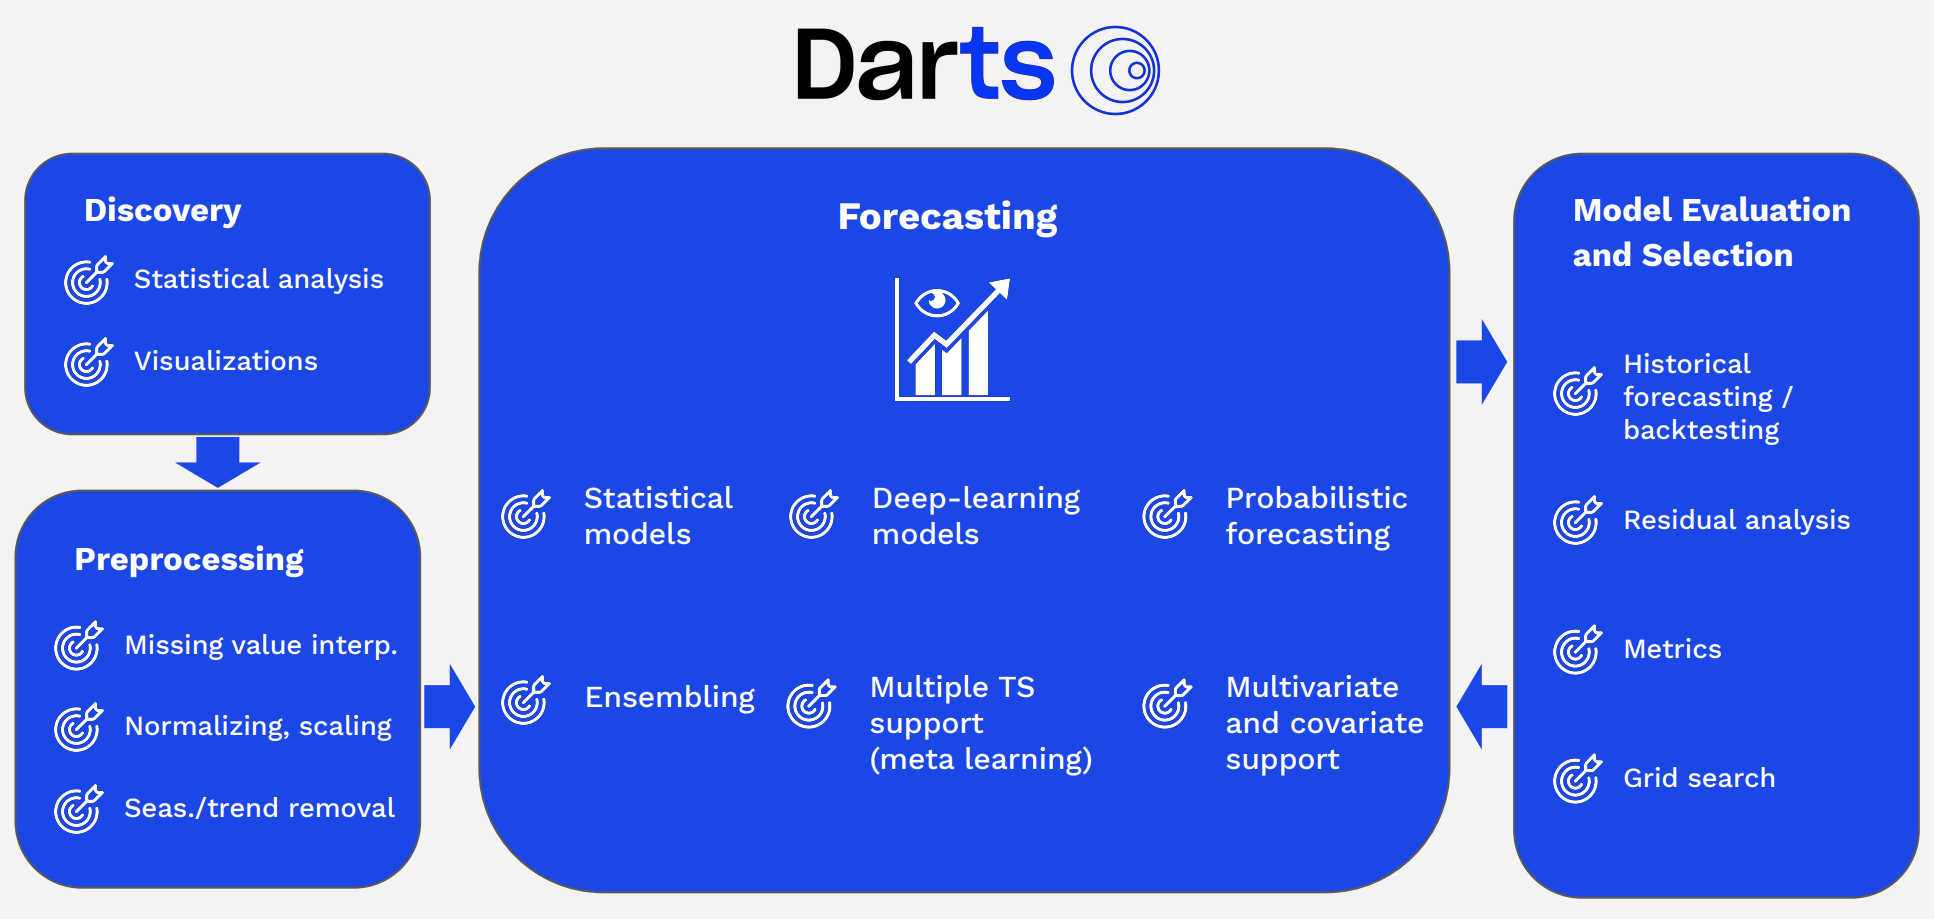 Darts is an attempt to smooth the end-to-end time series machine learning experience in Python